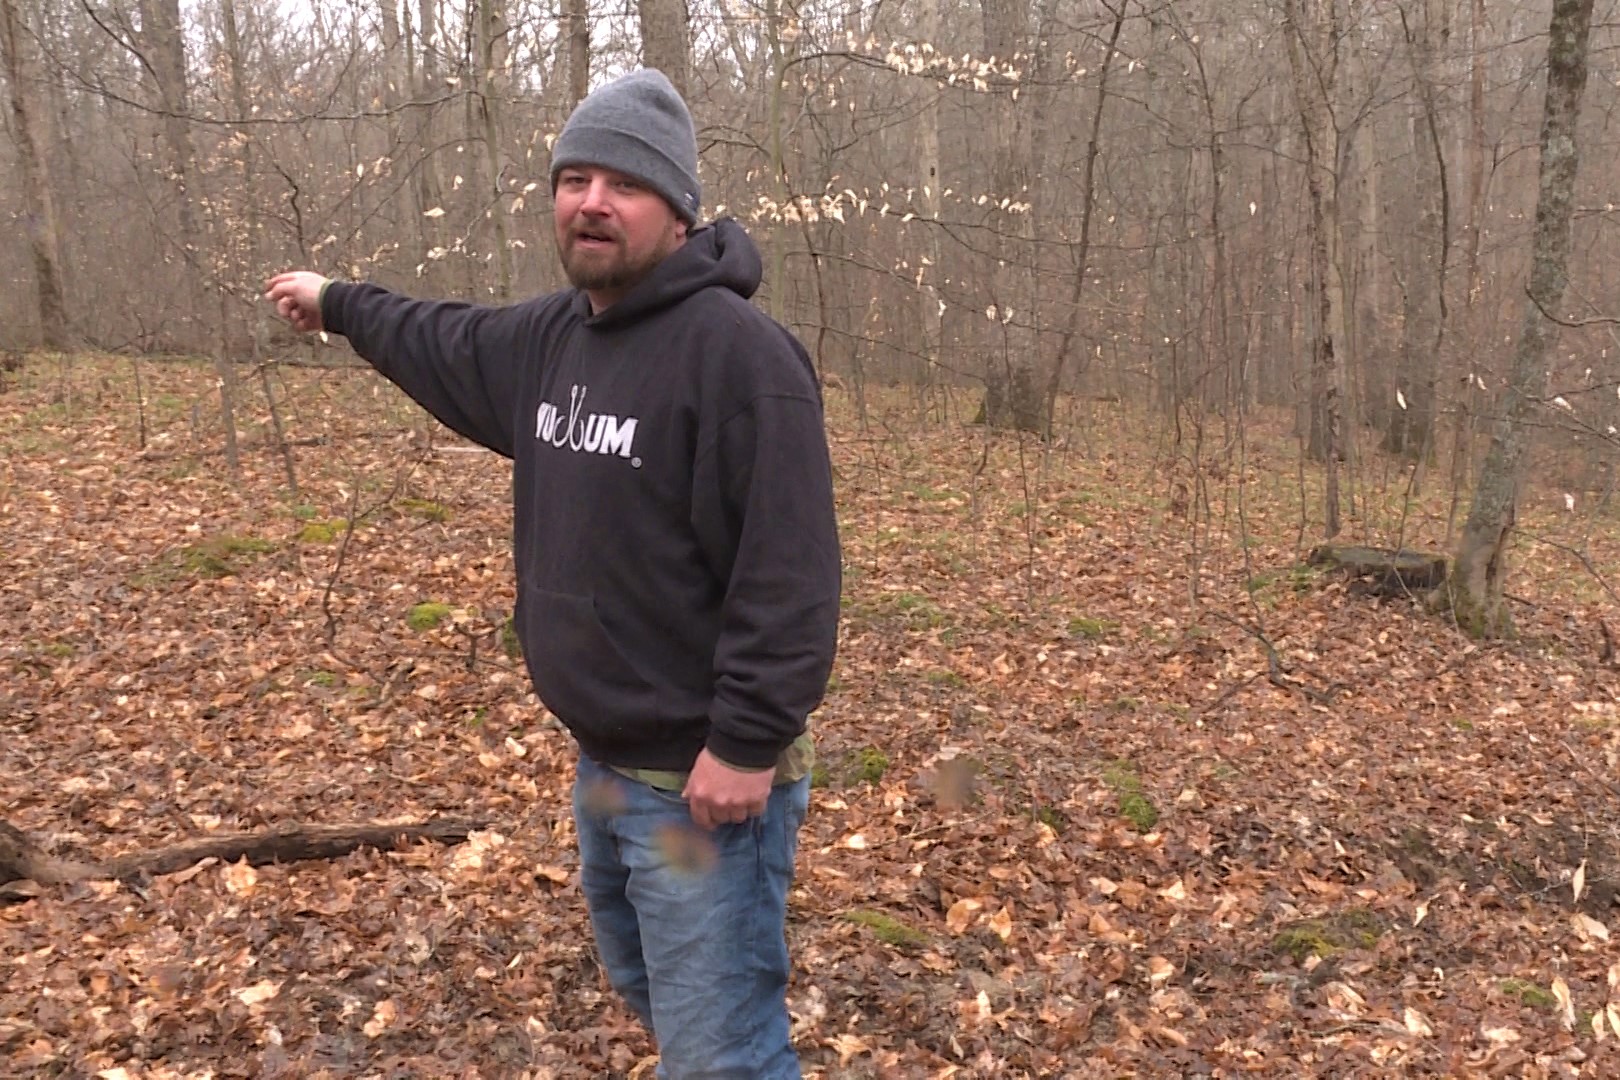 James Halcomb showing WTIU News reporter the scene of the possible mountain lion sighting.